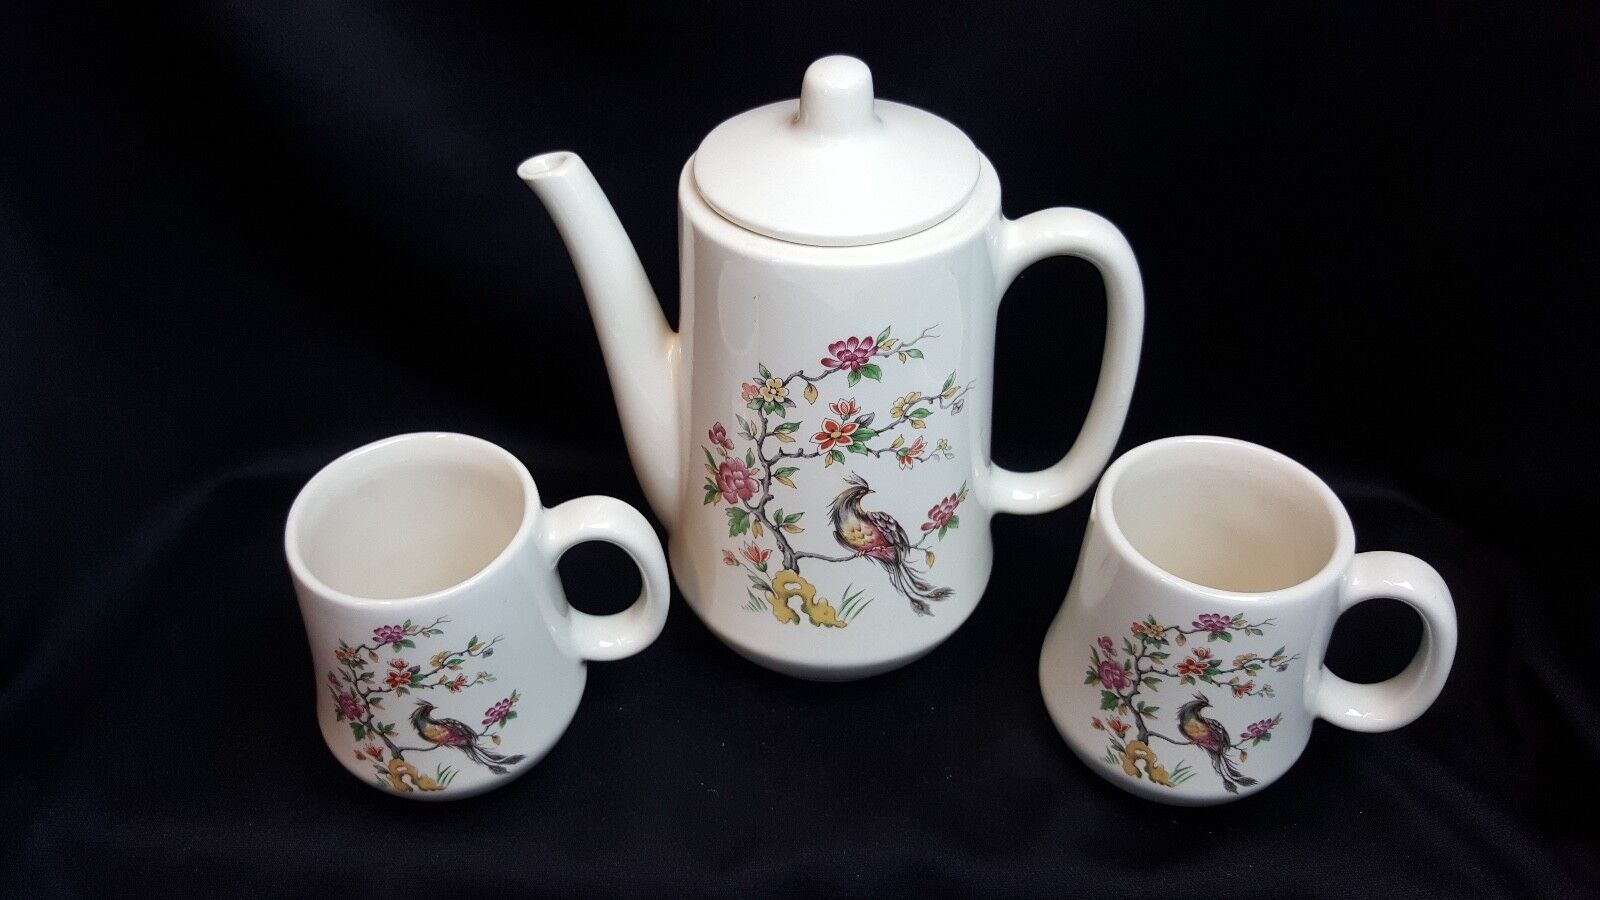  Teapot And Cups (2) For Two - Floral And Bird Design (Teapot 24 oz.) Signed